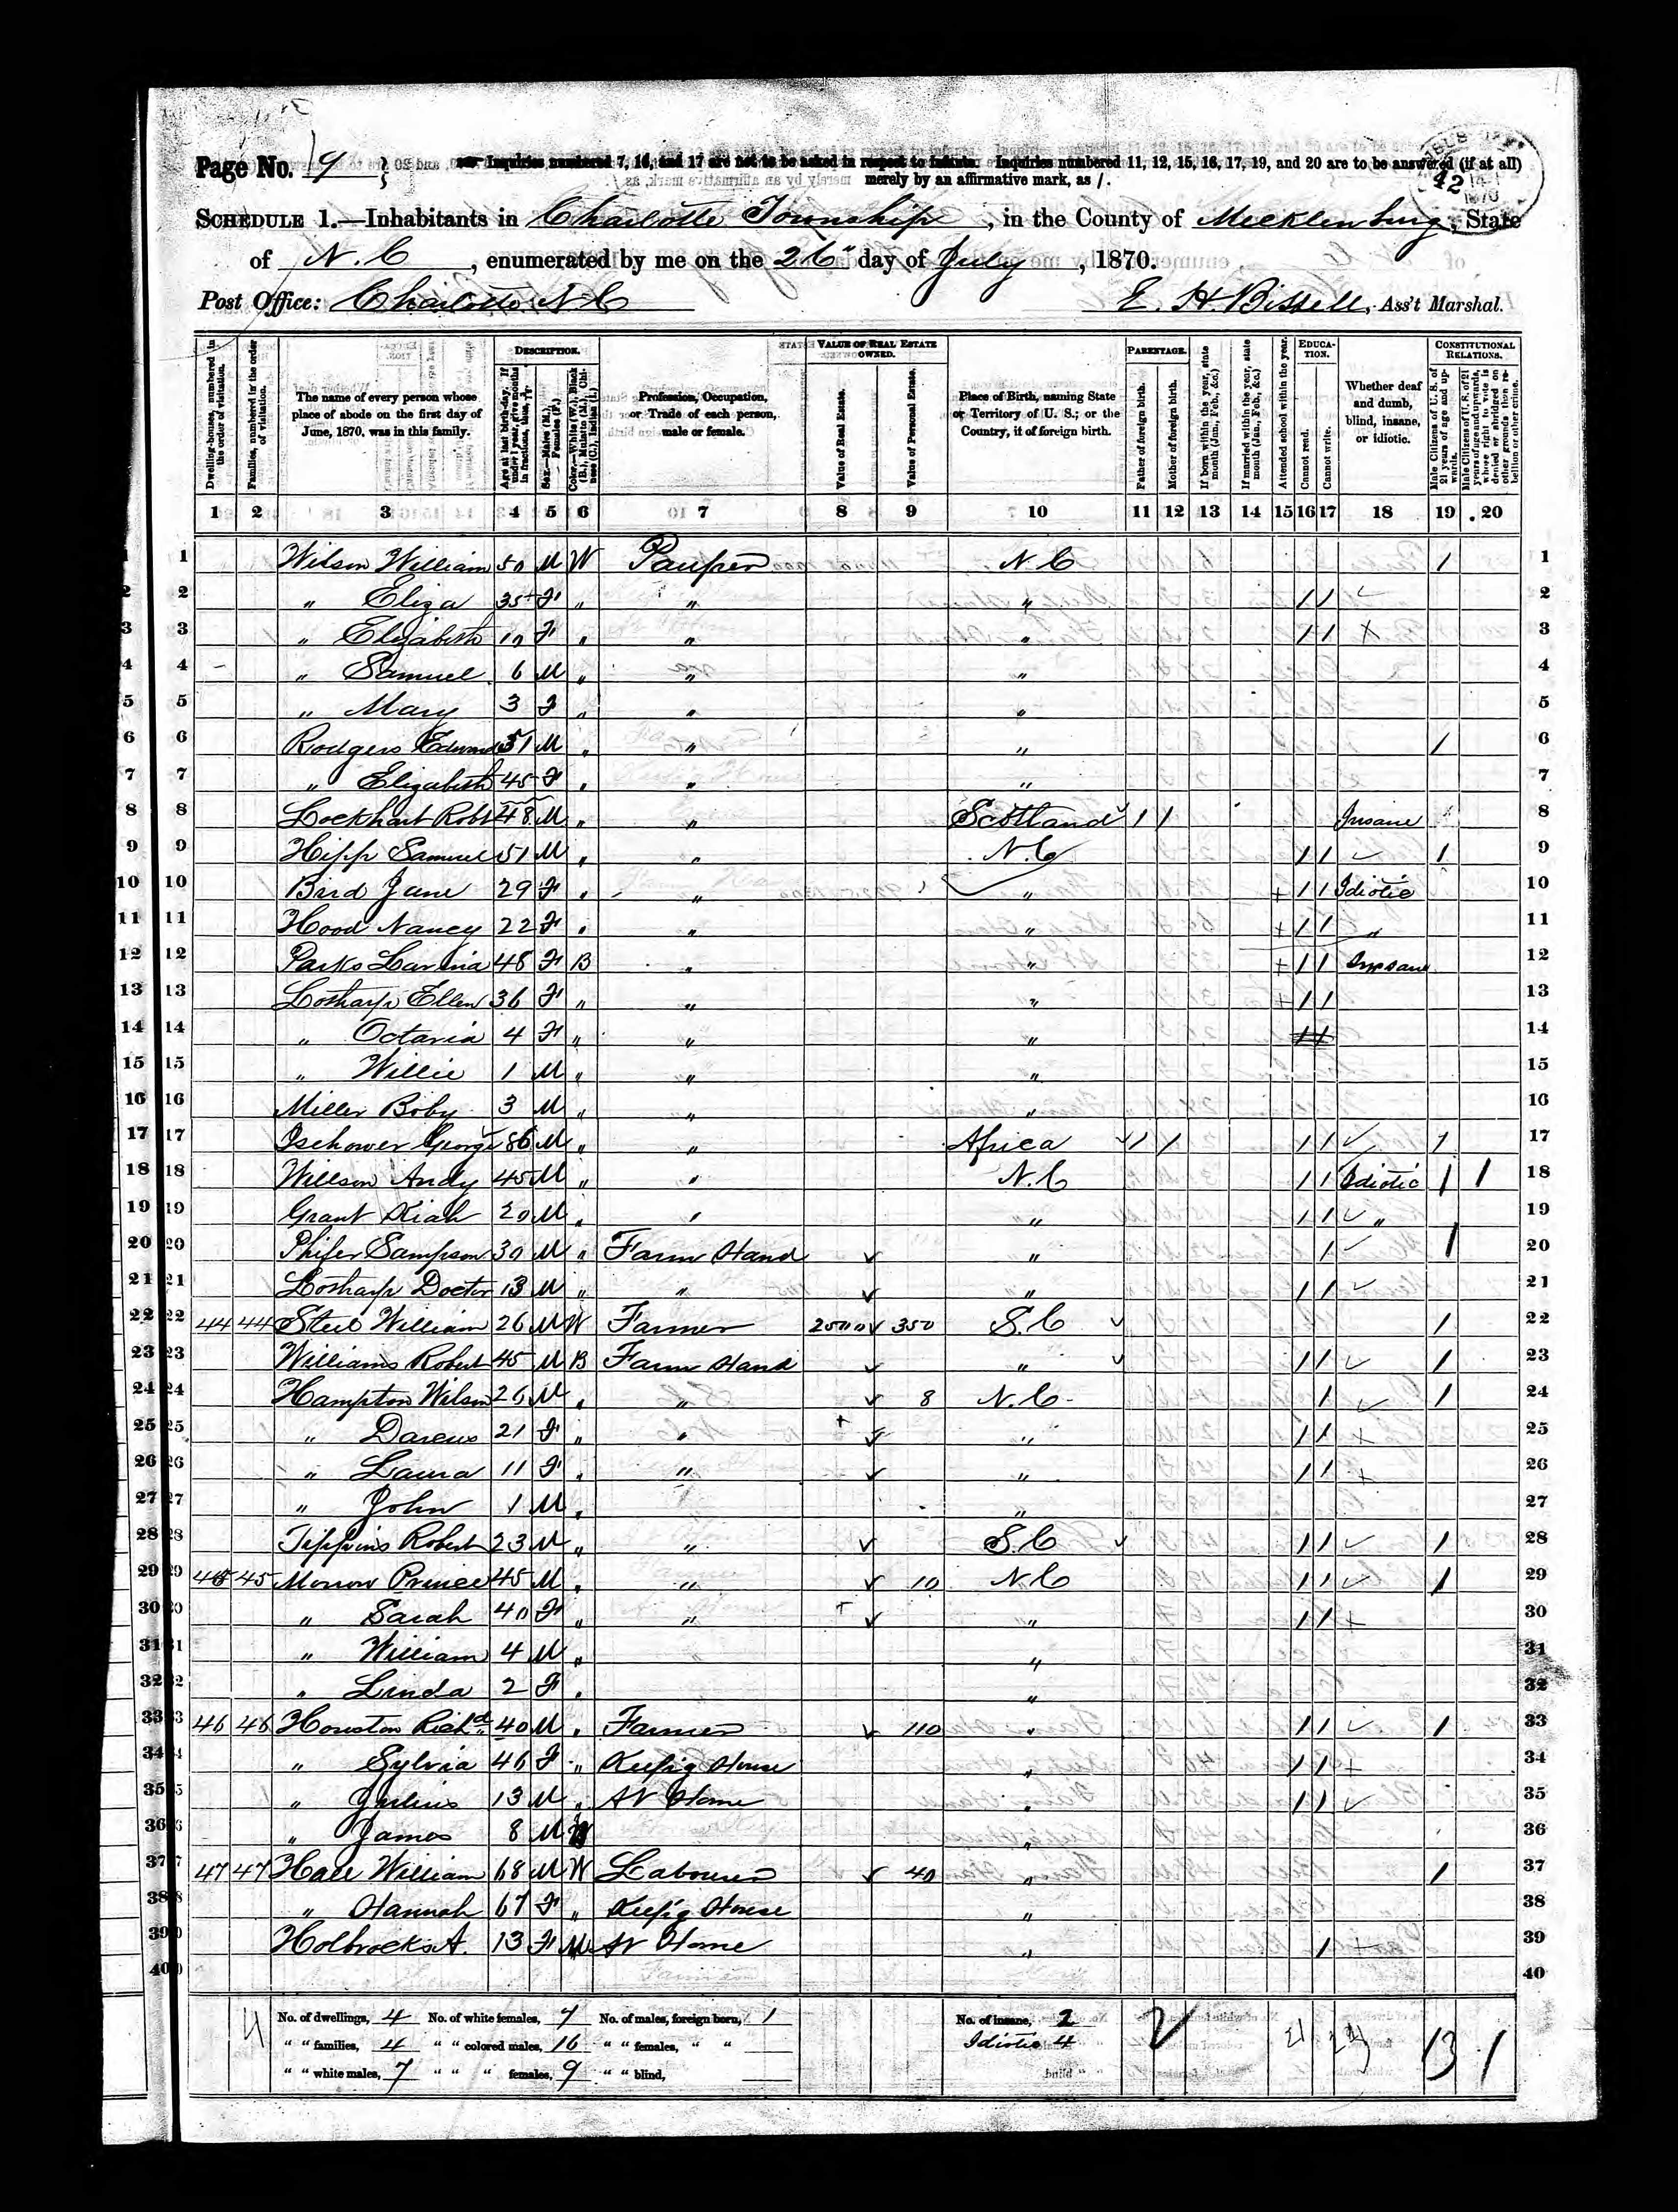 1870 Census, showing Poor House in Mecklenburg County